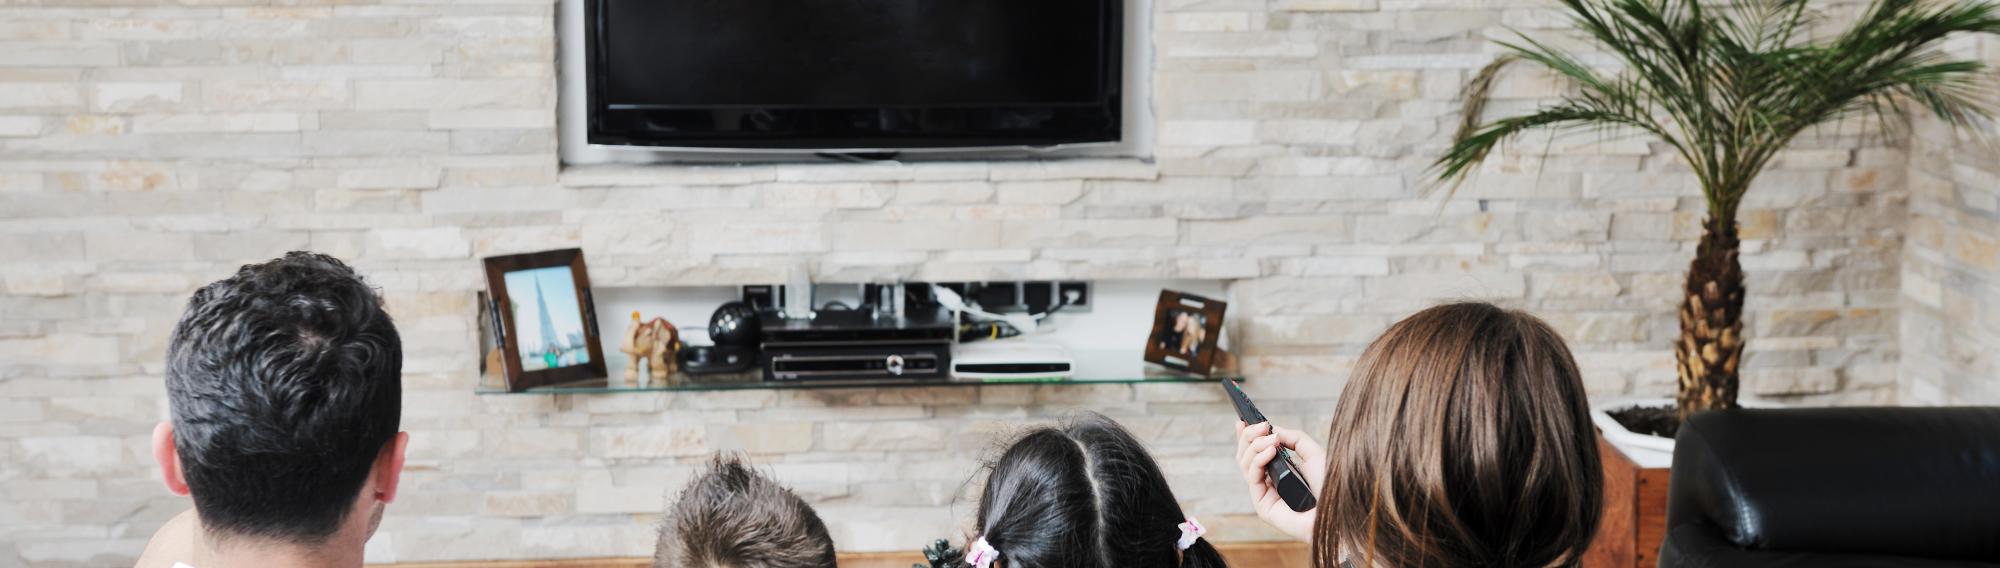 Image of living room with an affordable tv being used by a family